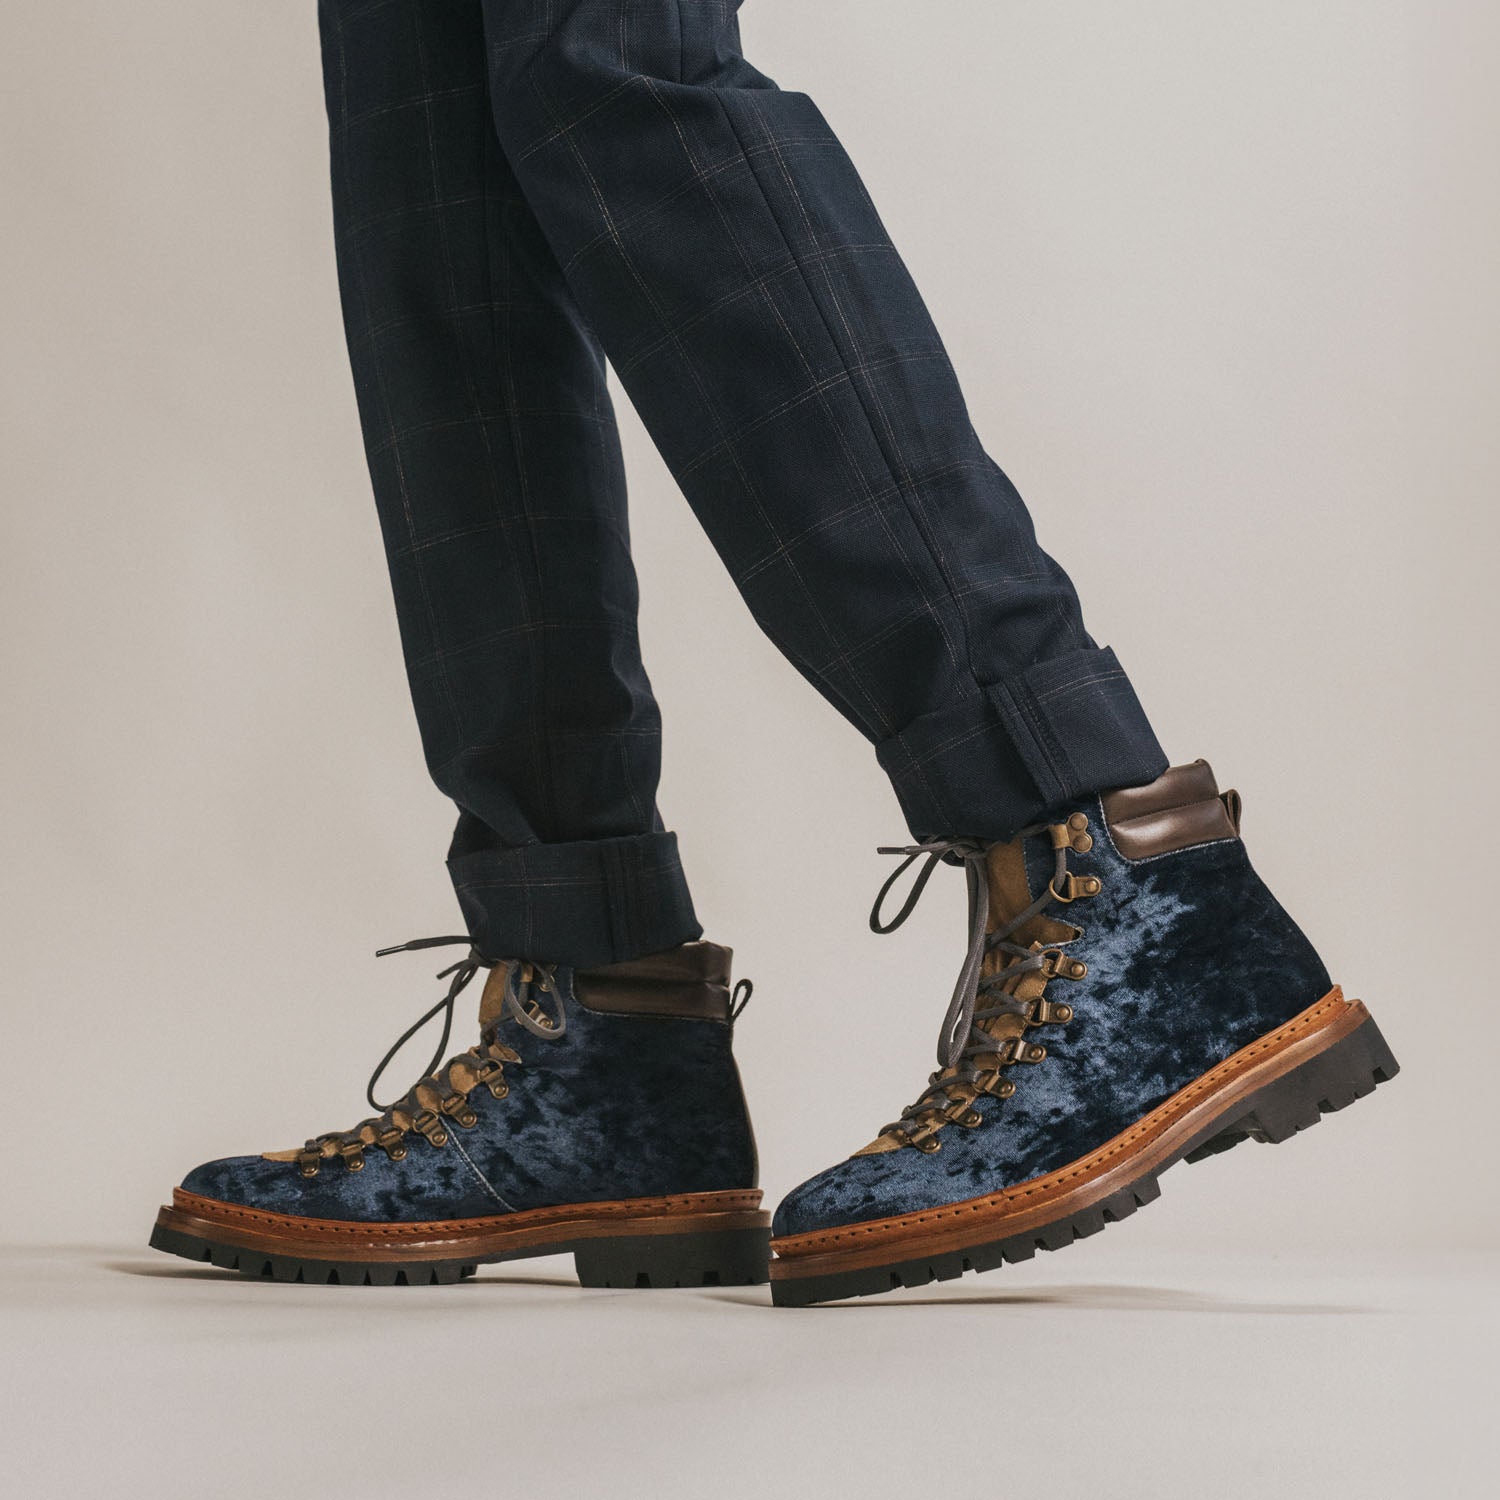 The Viking Boot in Deep Azure